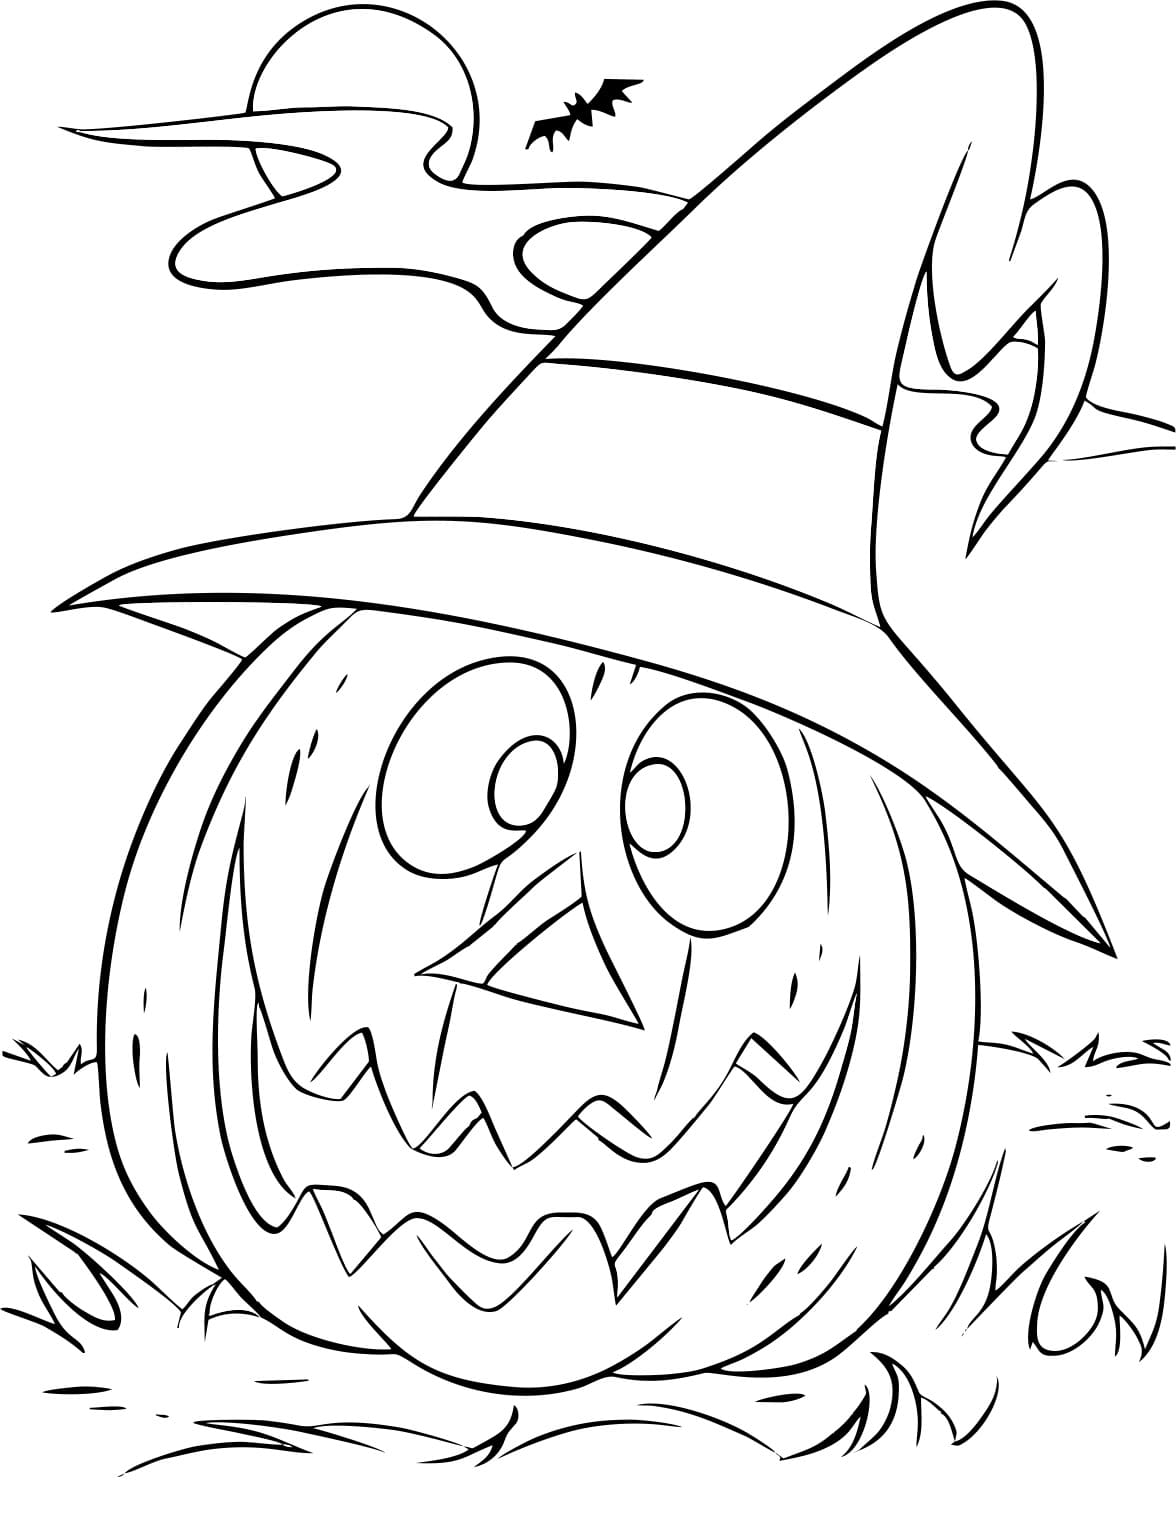 Halloween Coloring pages 🖌 to print and color